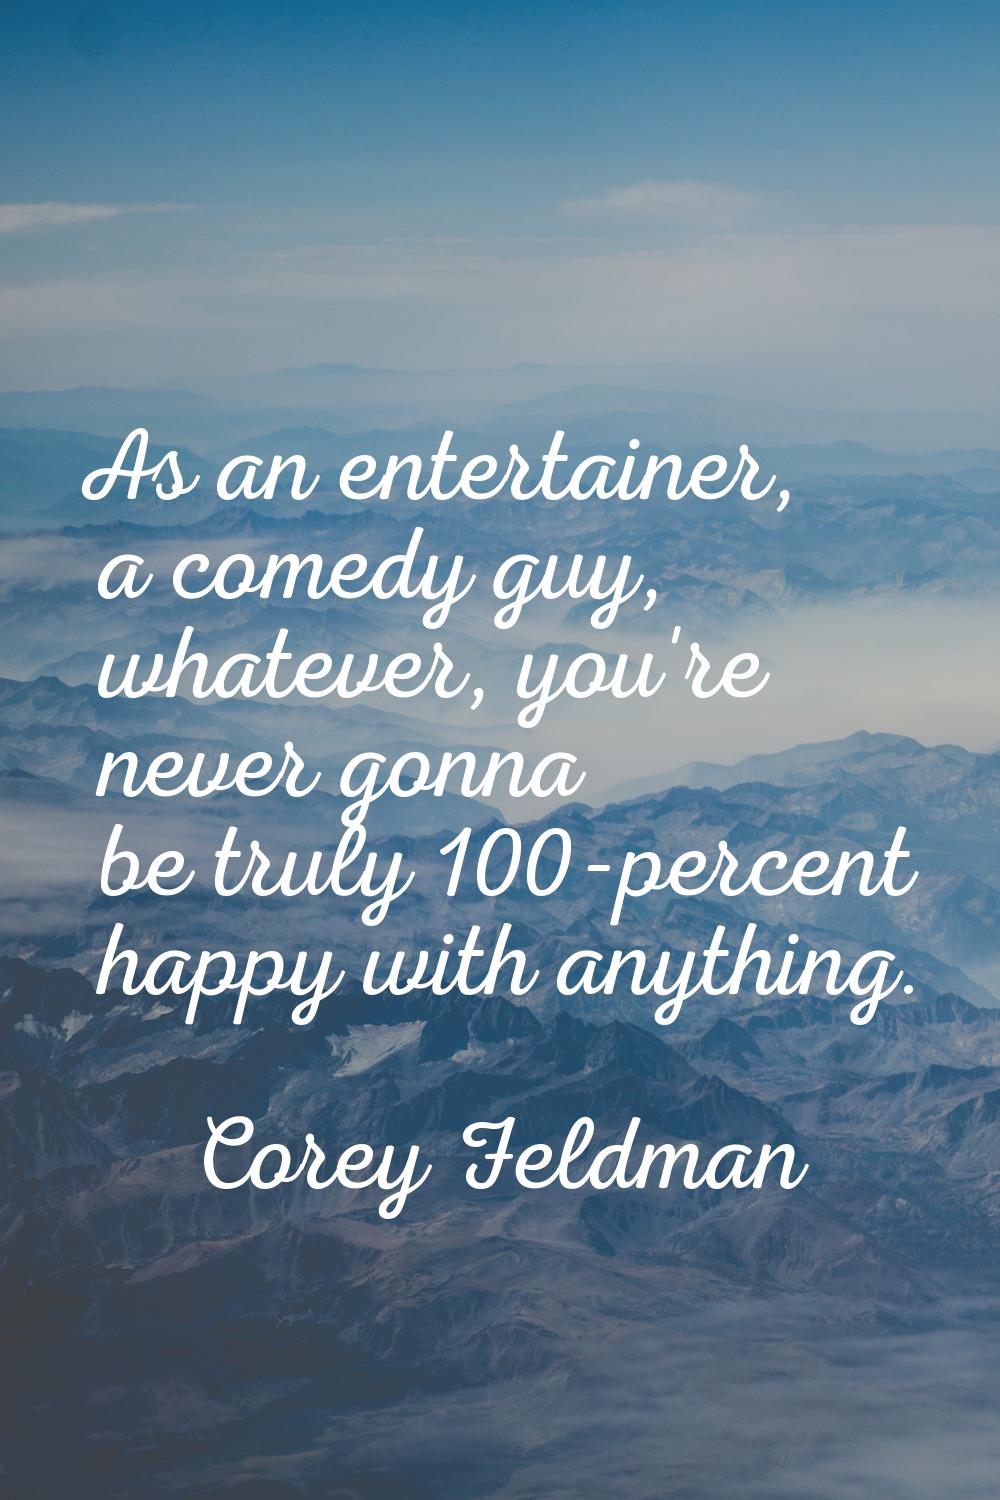 As an entertainer, a comedy guy, whatever, you're never gonna be truly 100-percent happy with anyth